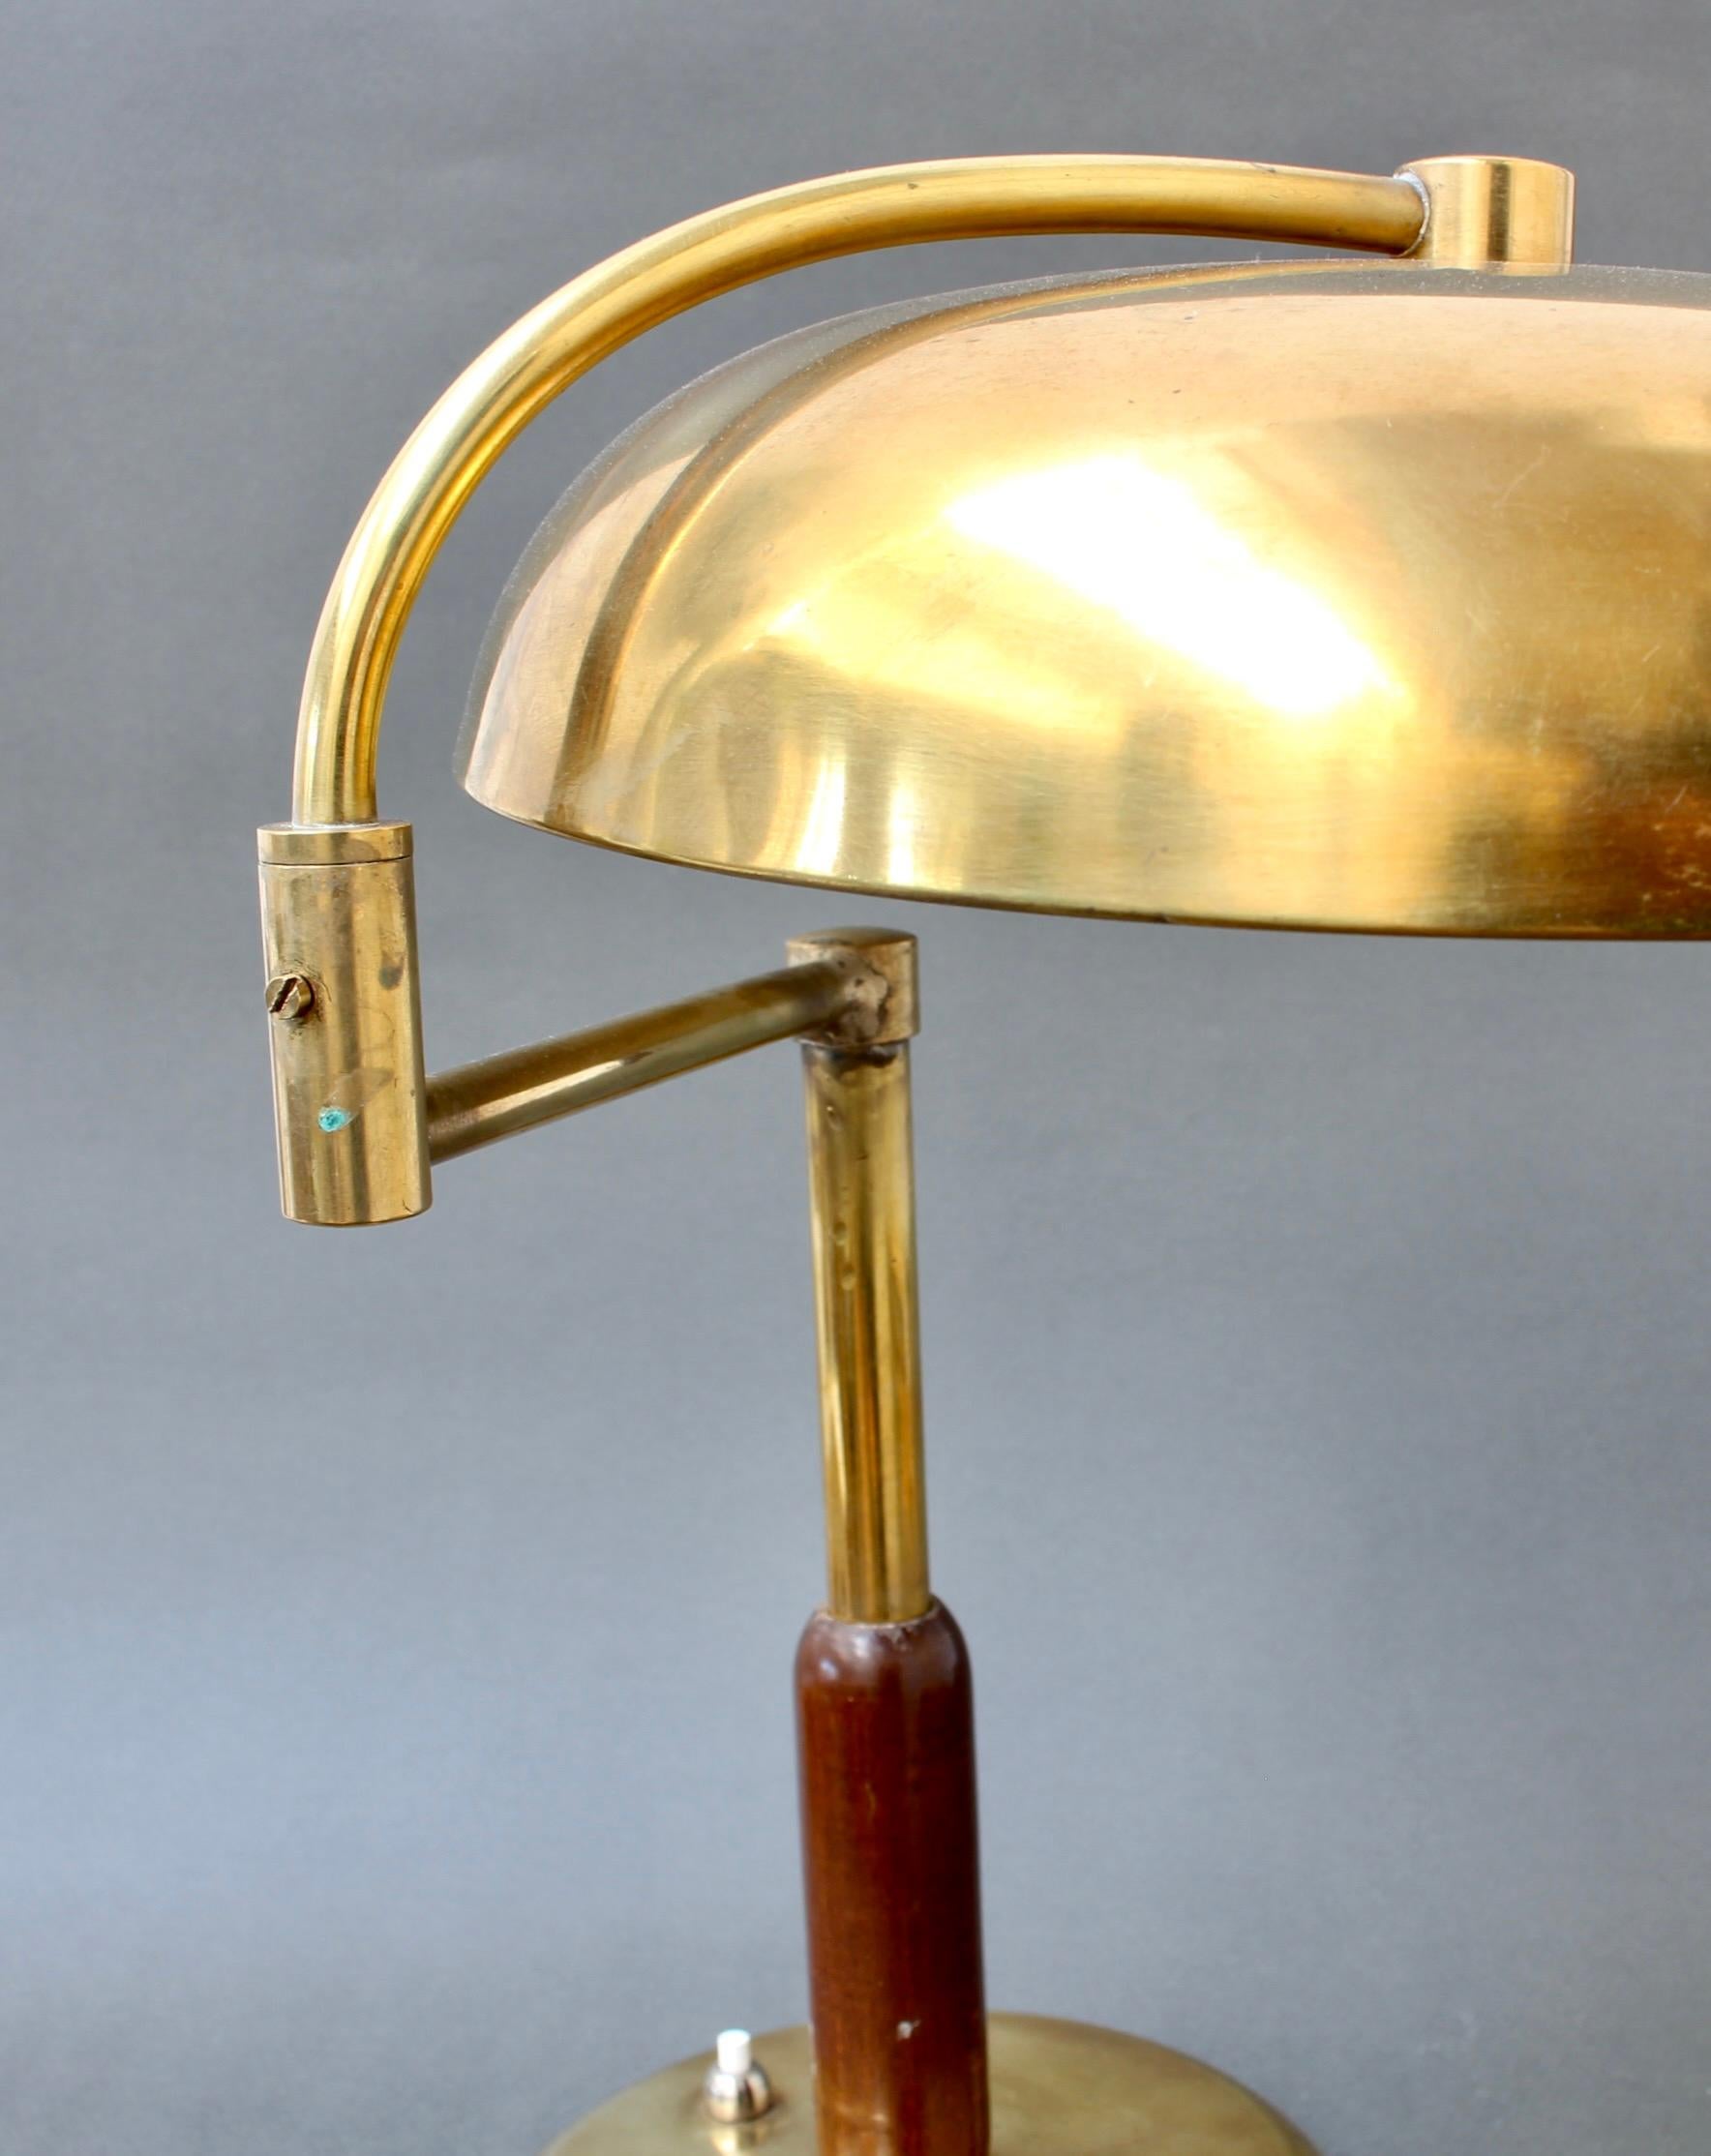 Italian Mid-Century Brass Table Lamp with Swivel Arm, circa 1950s For Sale 8